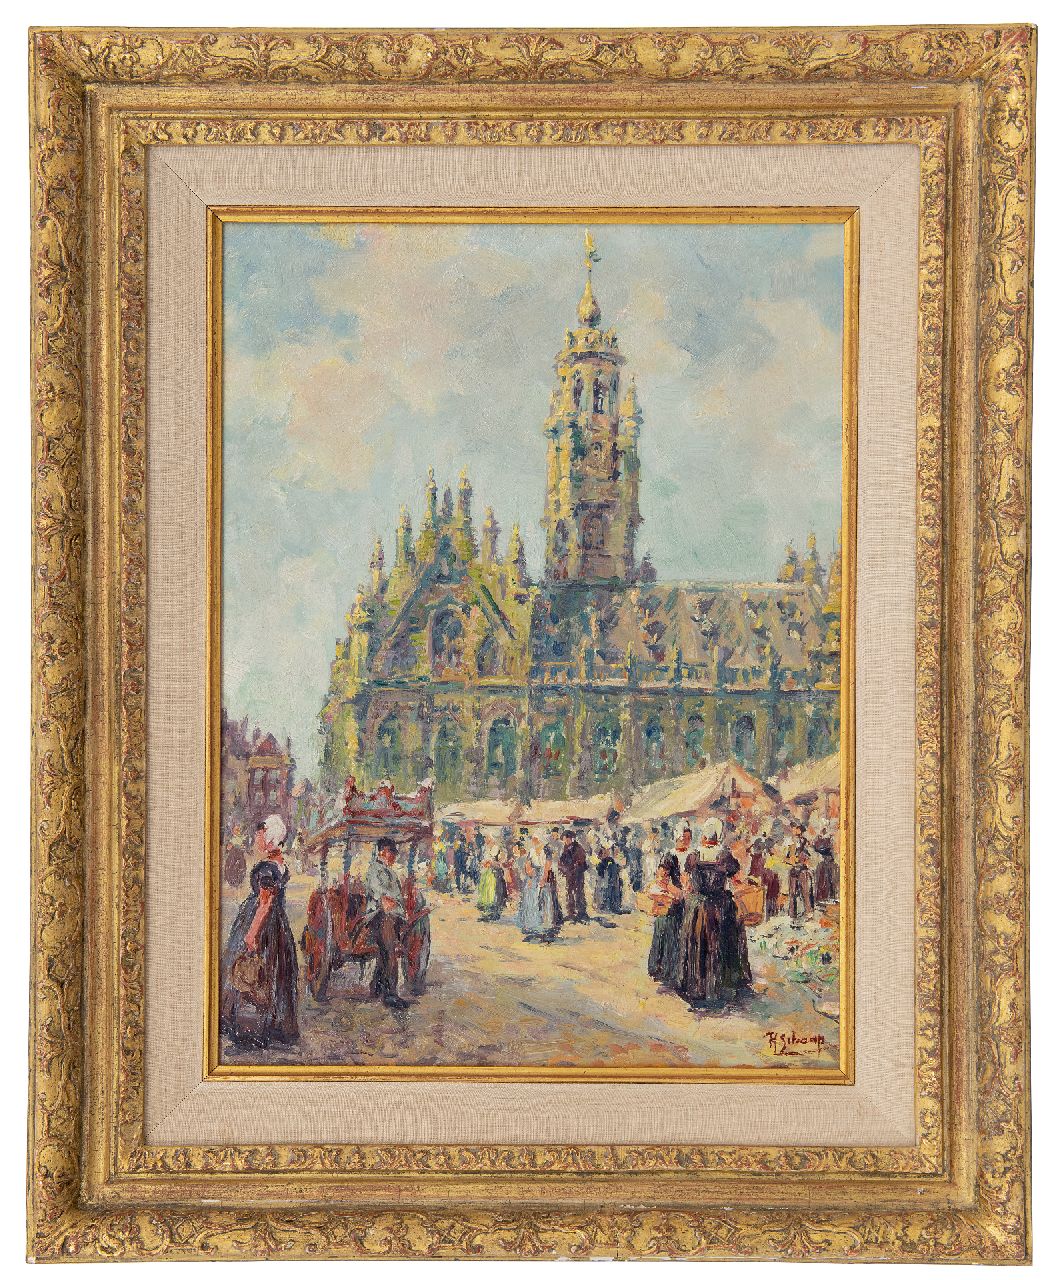 Schaap H.  | Hendrik Schaap | Paintings offered for sale | Market at the town hall of Middelburg, oil on painter's board 40.7 x 30.8 cm, signed l.r.